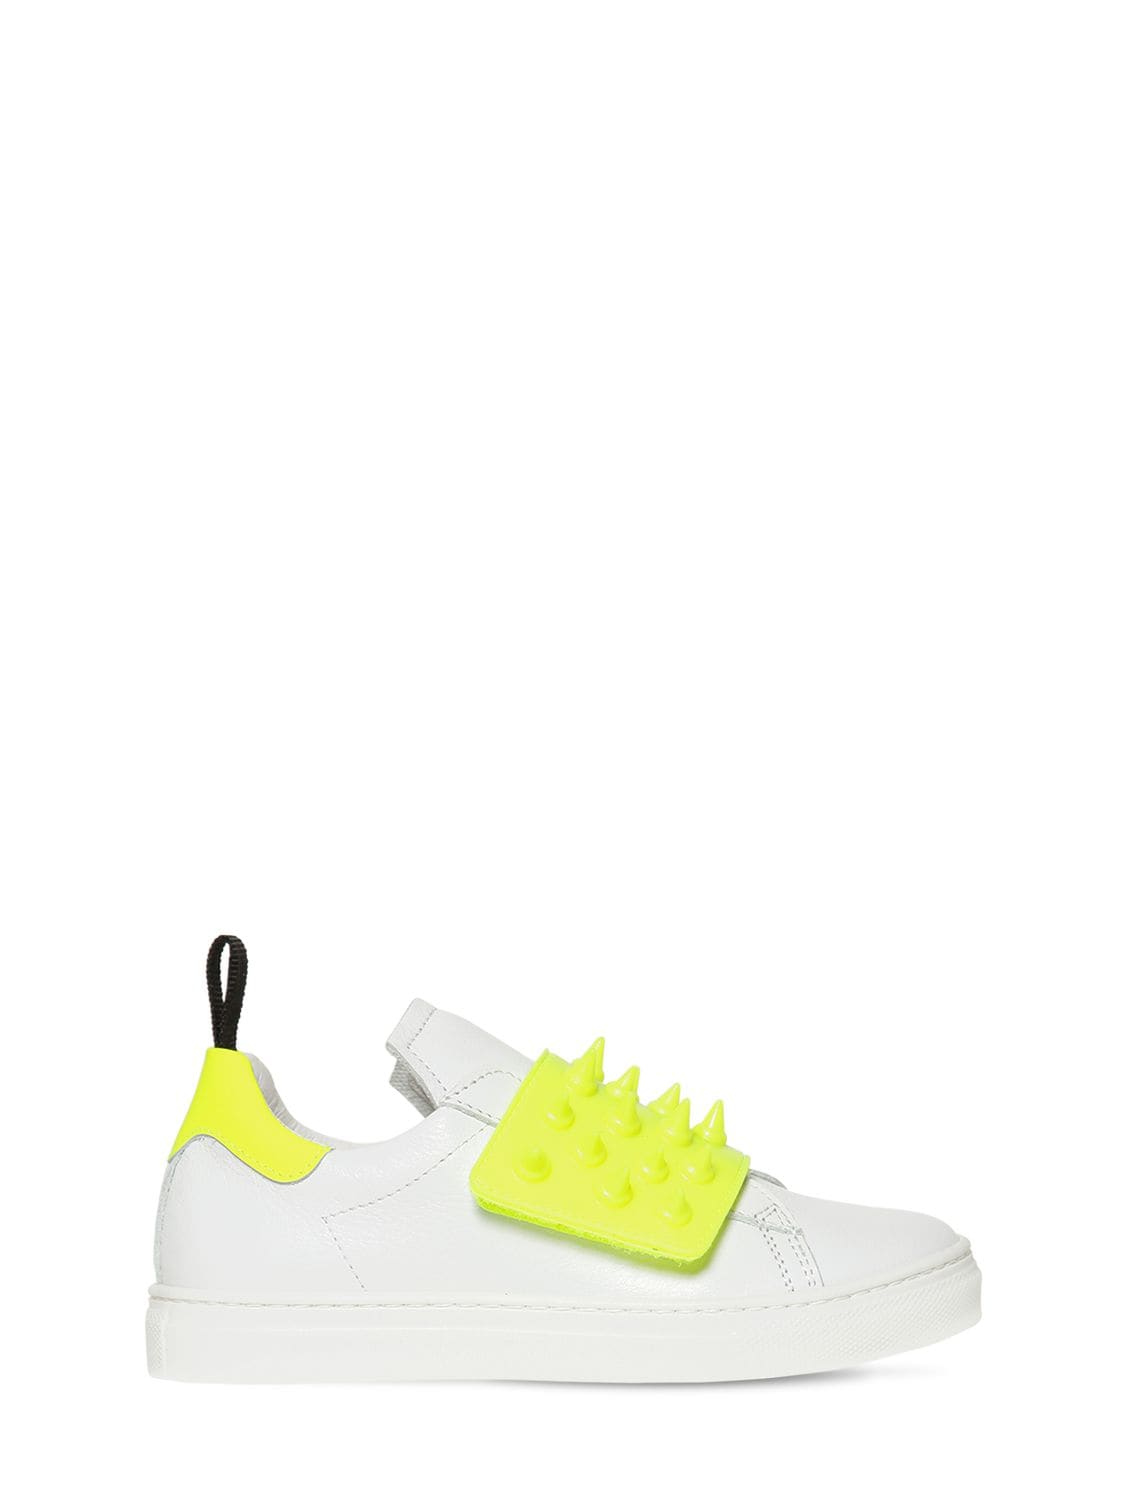 Am 66 Kids' Spiked Two Tone Leather Sneakers In White,yellow